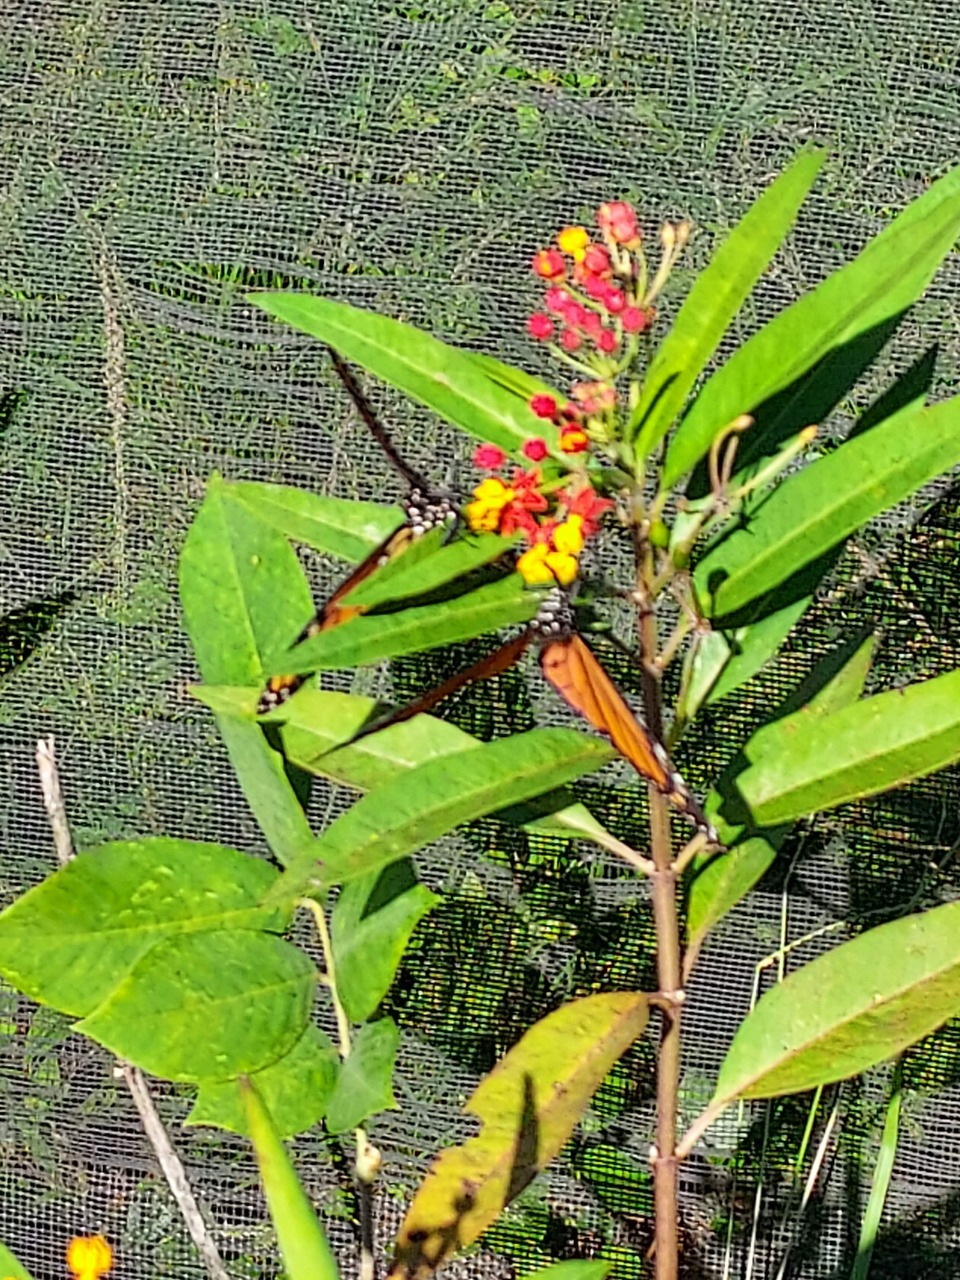 monarch on Aesclepias currasavica at the Key West Botanical Garden